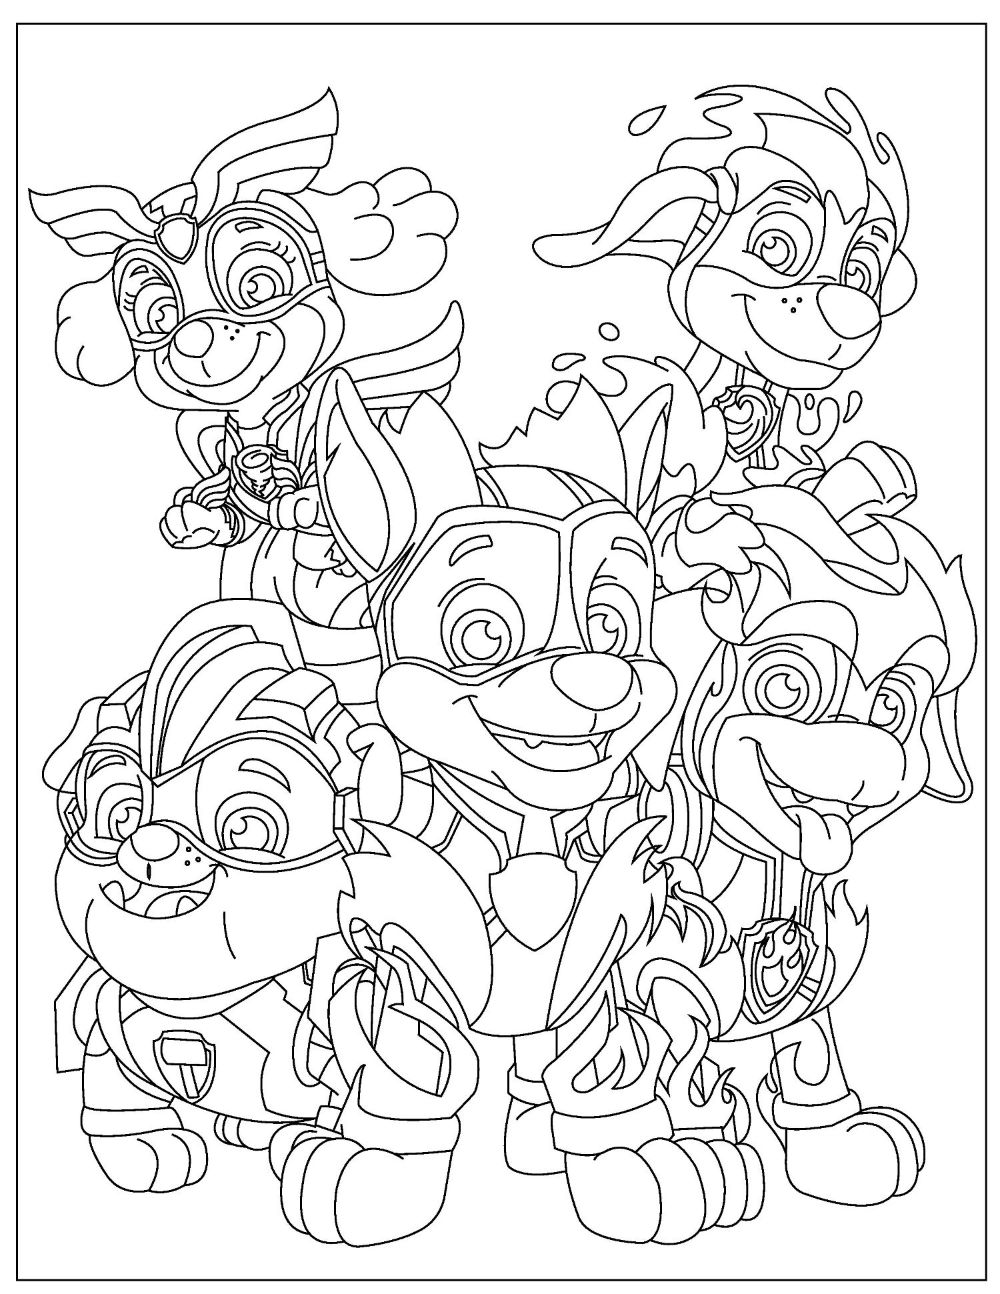 Paw Patrol Coloring Pages FREE Printable 45